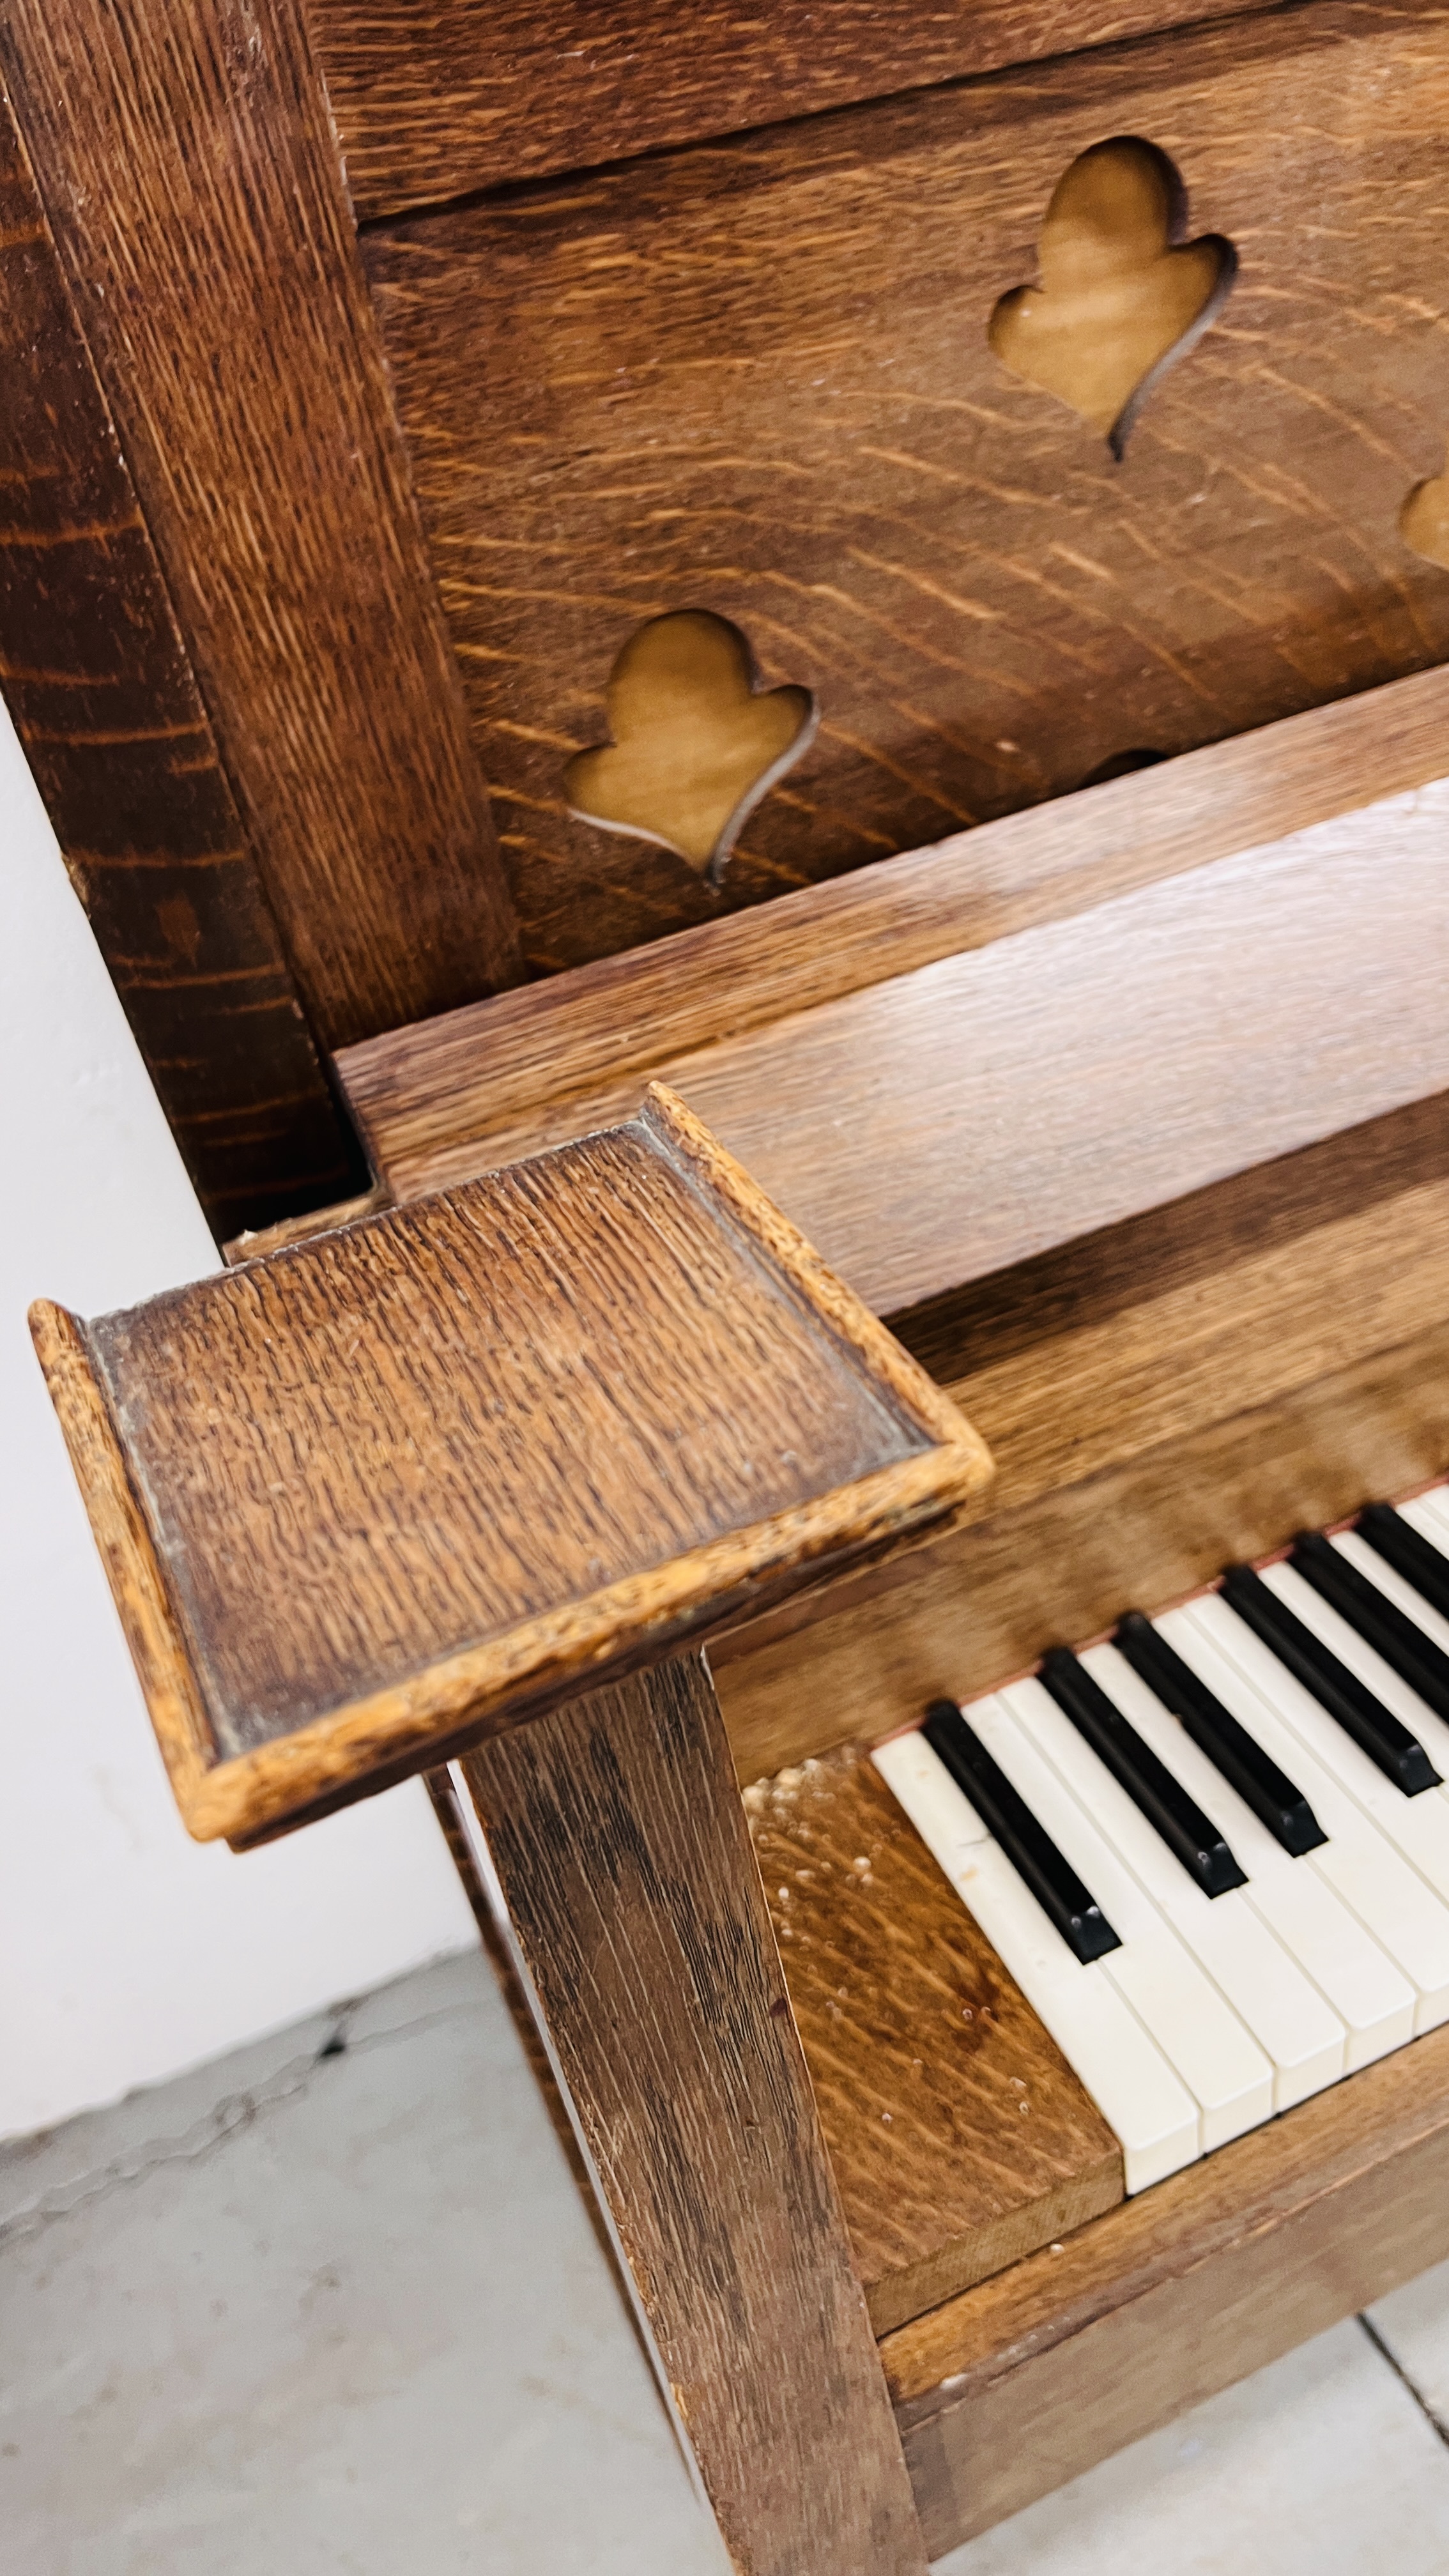 A VINTAGE OAK ARTS AND CRAFTS PIANO WITH ORIGINAL MAKERS LABEL COLLARD & COLLARD HOLDER BROS. - Image 9 of 12